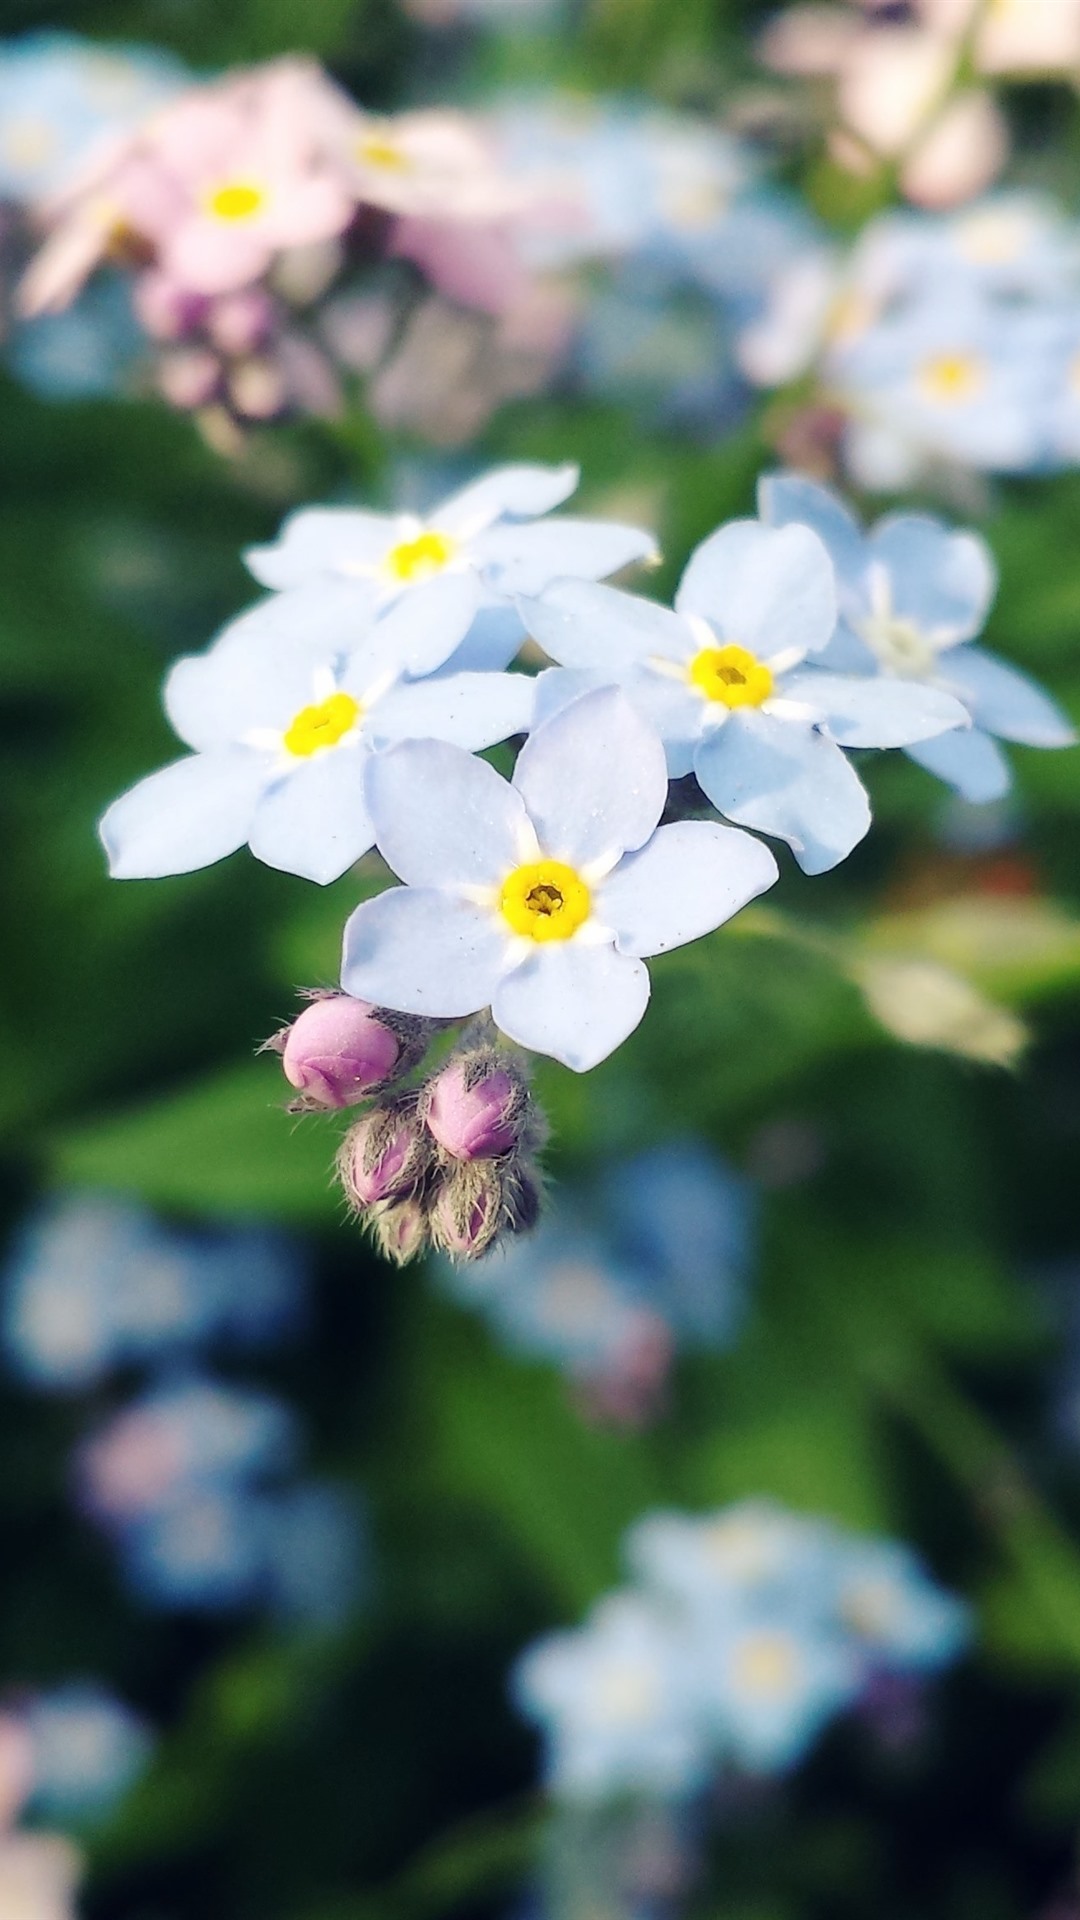 Iphone Wallpaper White Forget Me Not - Iphone Forget Me Not - HD Wallpaper 